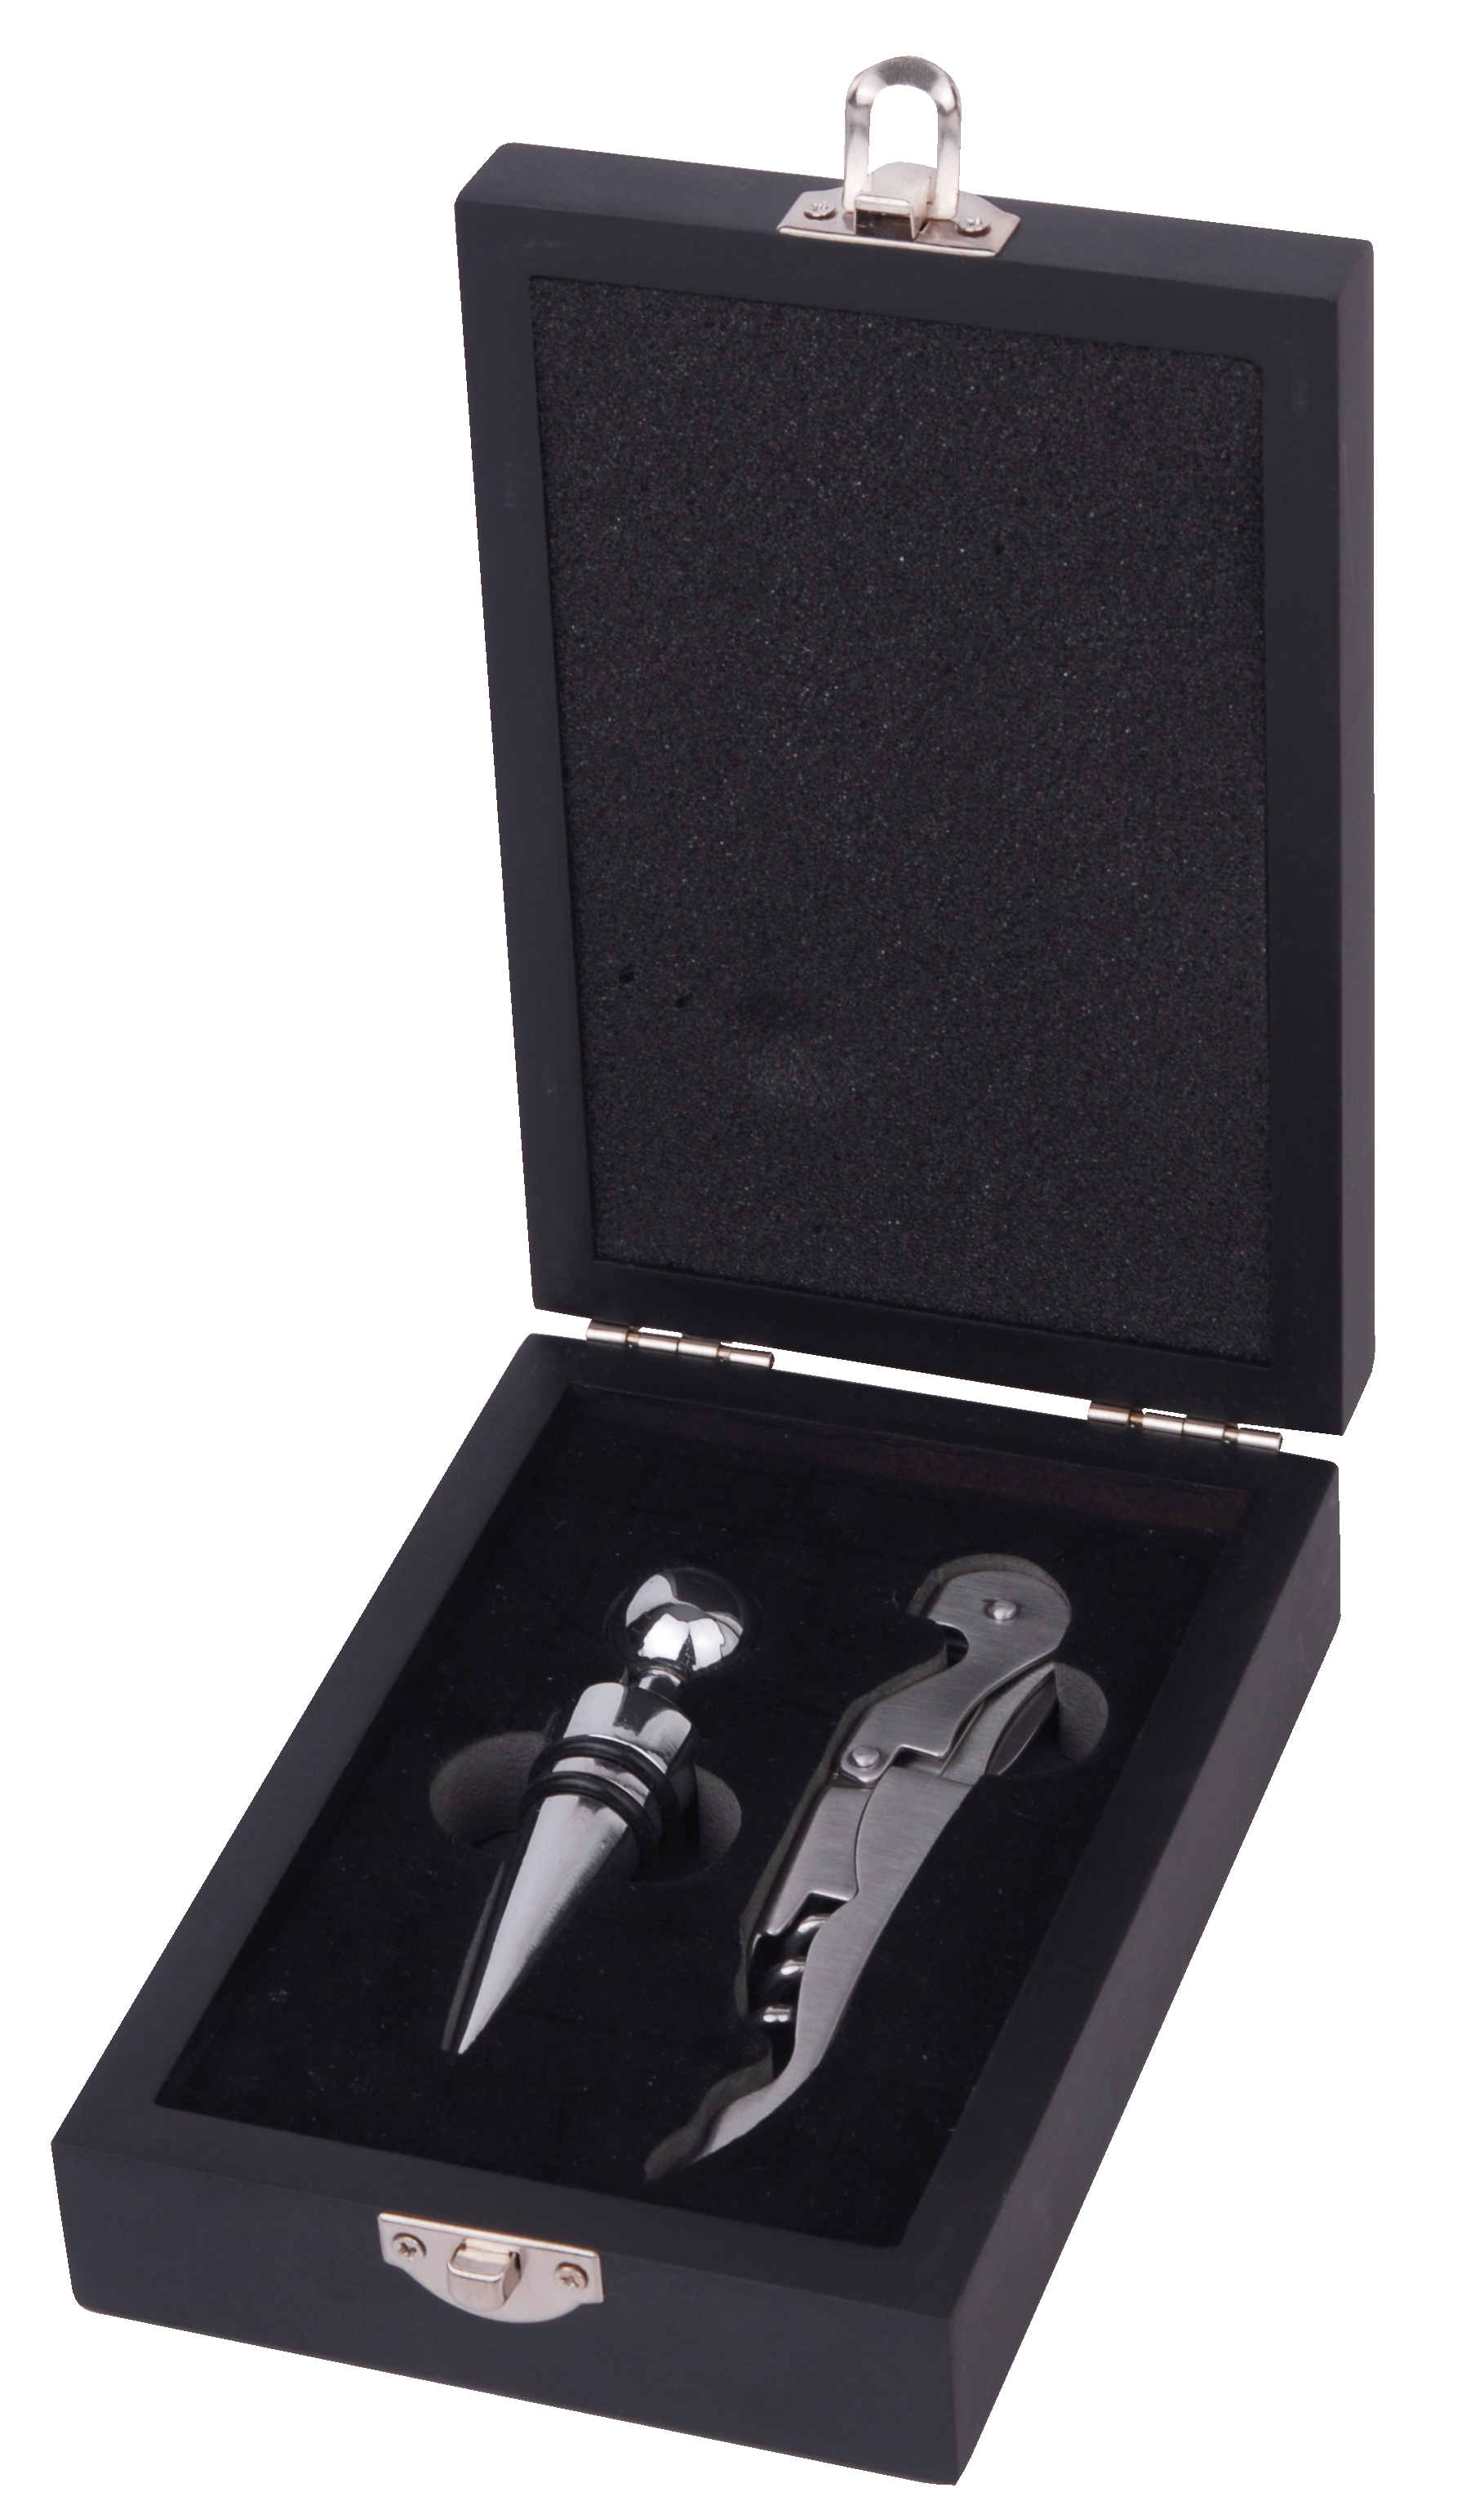 VPS-0010 - Stainless Steel Wine Opener & Stopper Set in a Wood Case